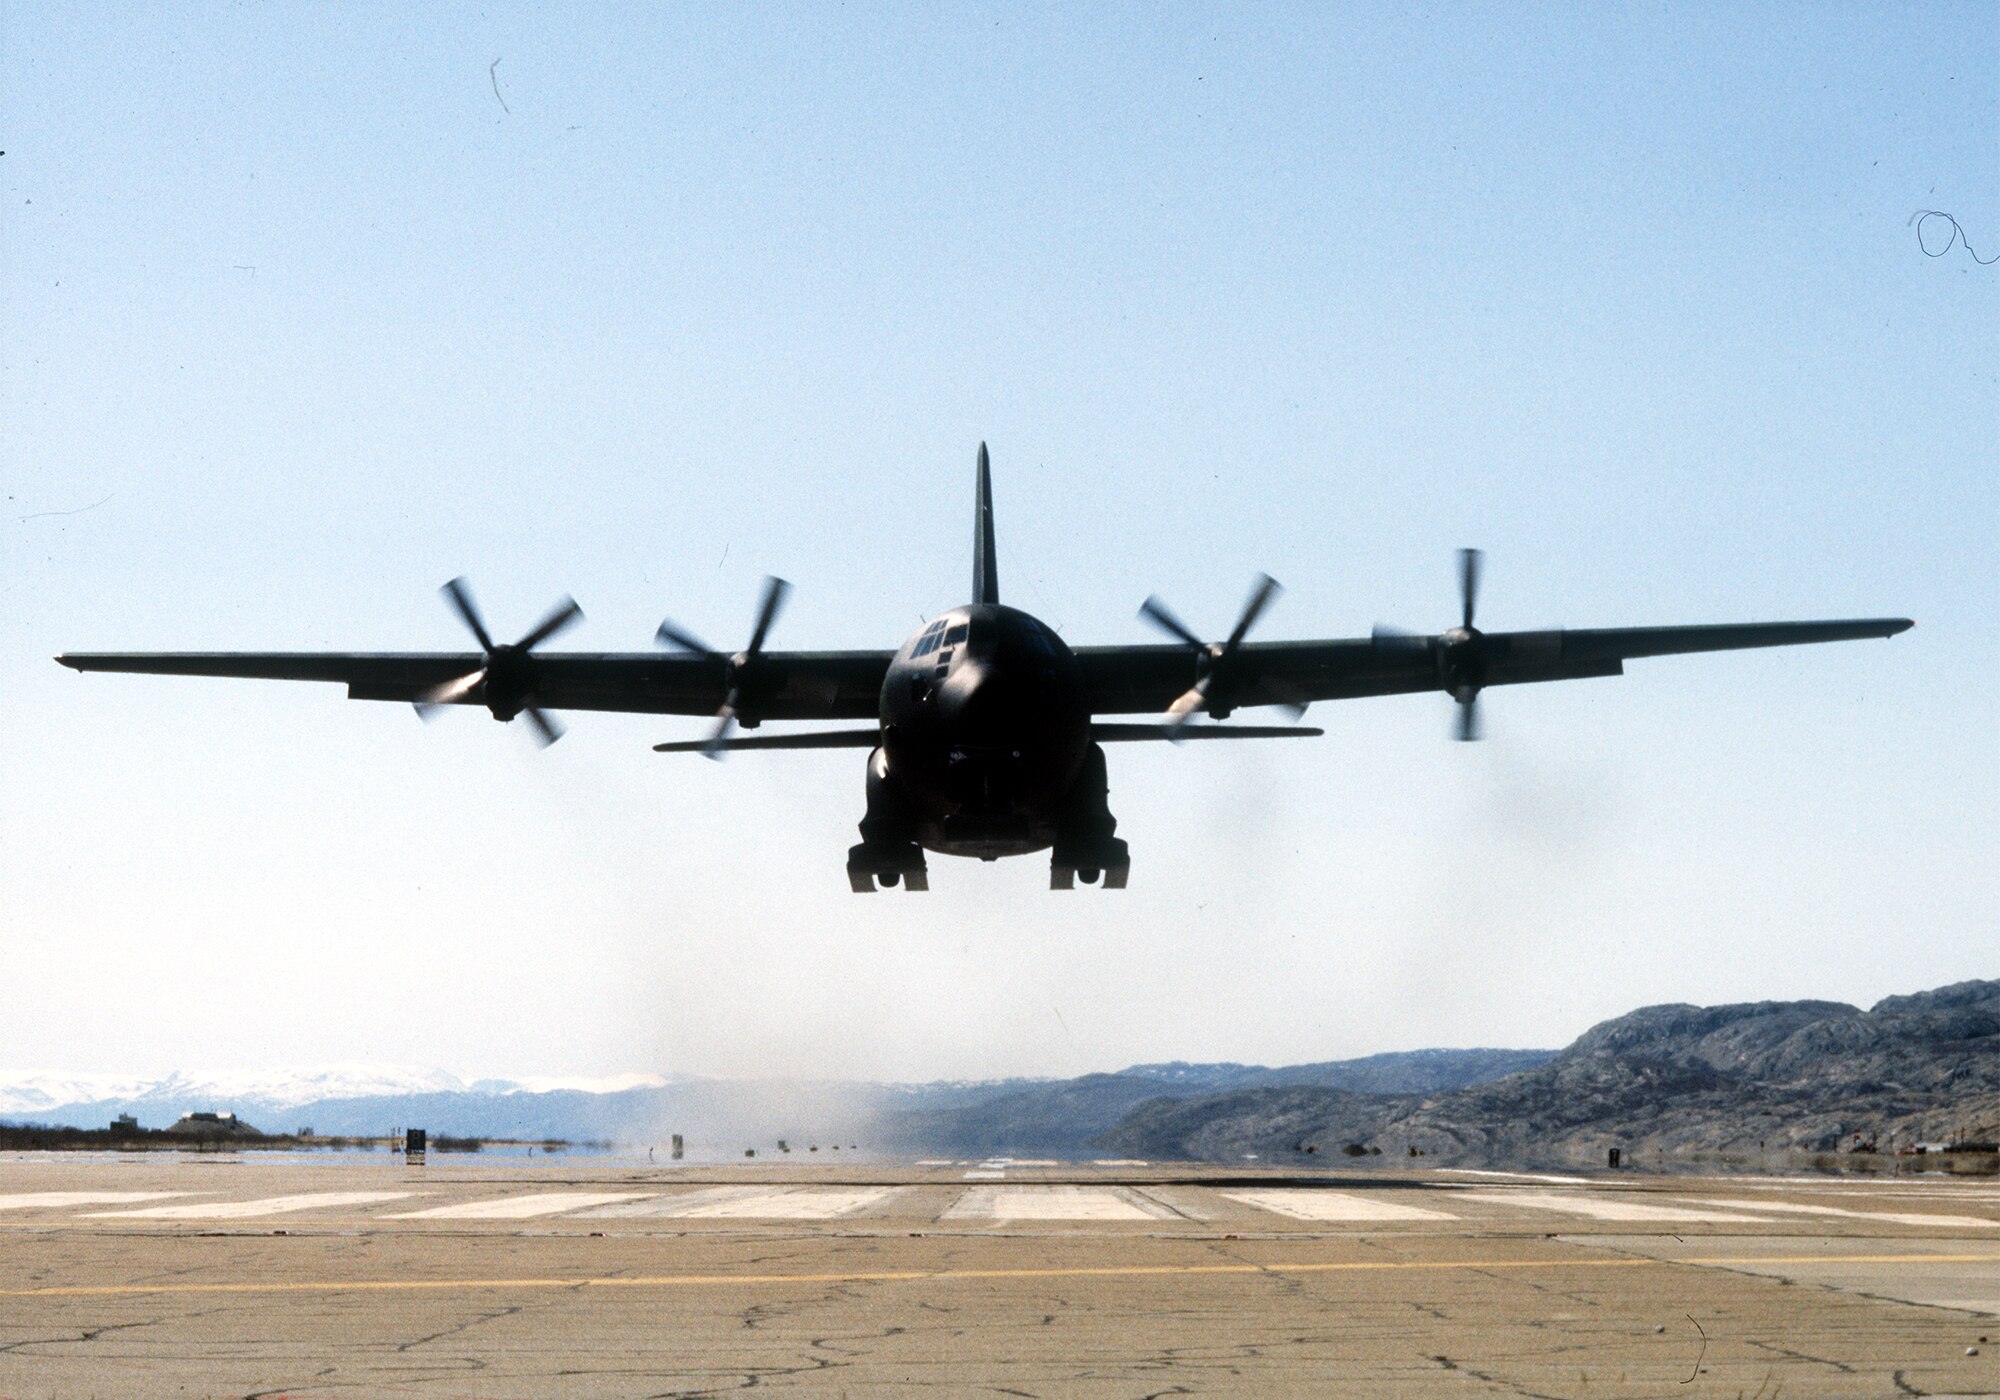 A 109th Tactical Airlift Group LC-130 takes off from Kangerlussuaq airport in Greenland in 1988 as the crew trains for snow landings in order to augment the Navy in the Antarctica in the coming months. (USAF Photo by MSgt Joe Pittelli/Released)